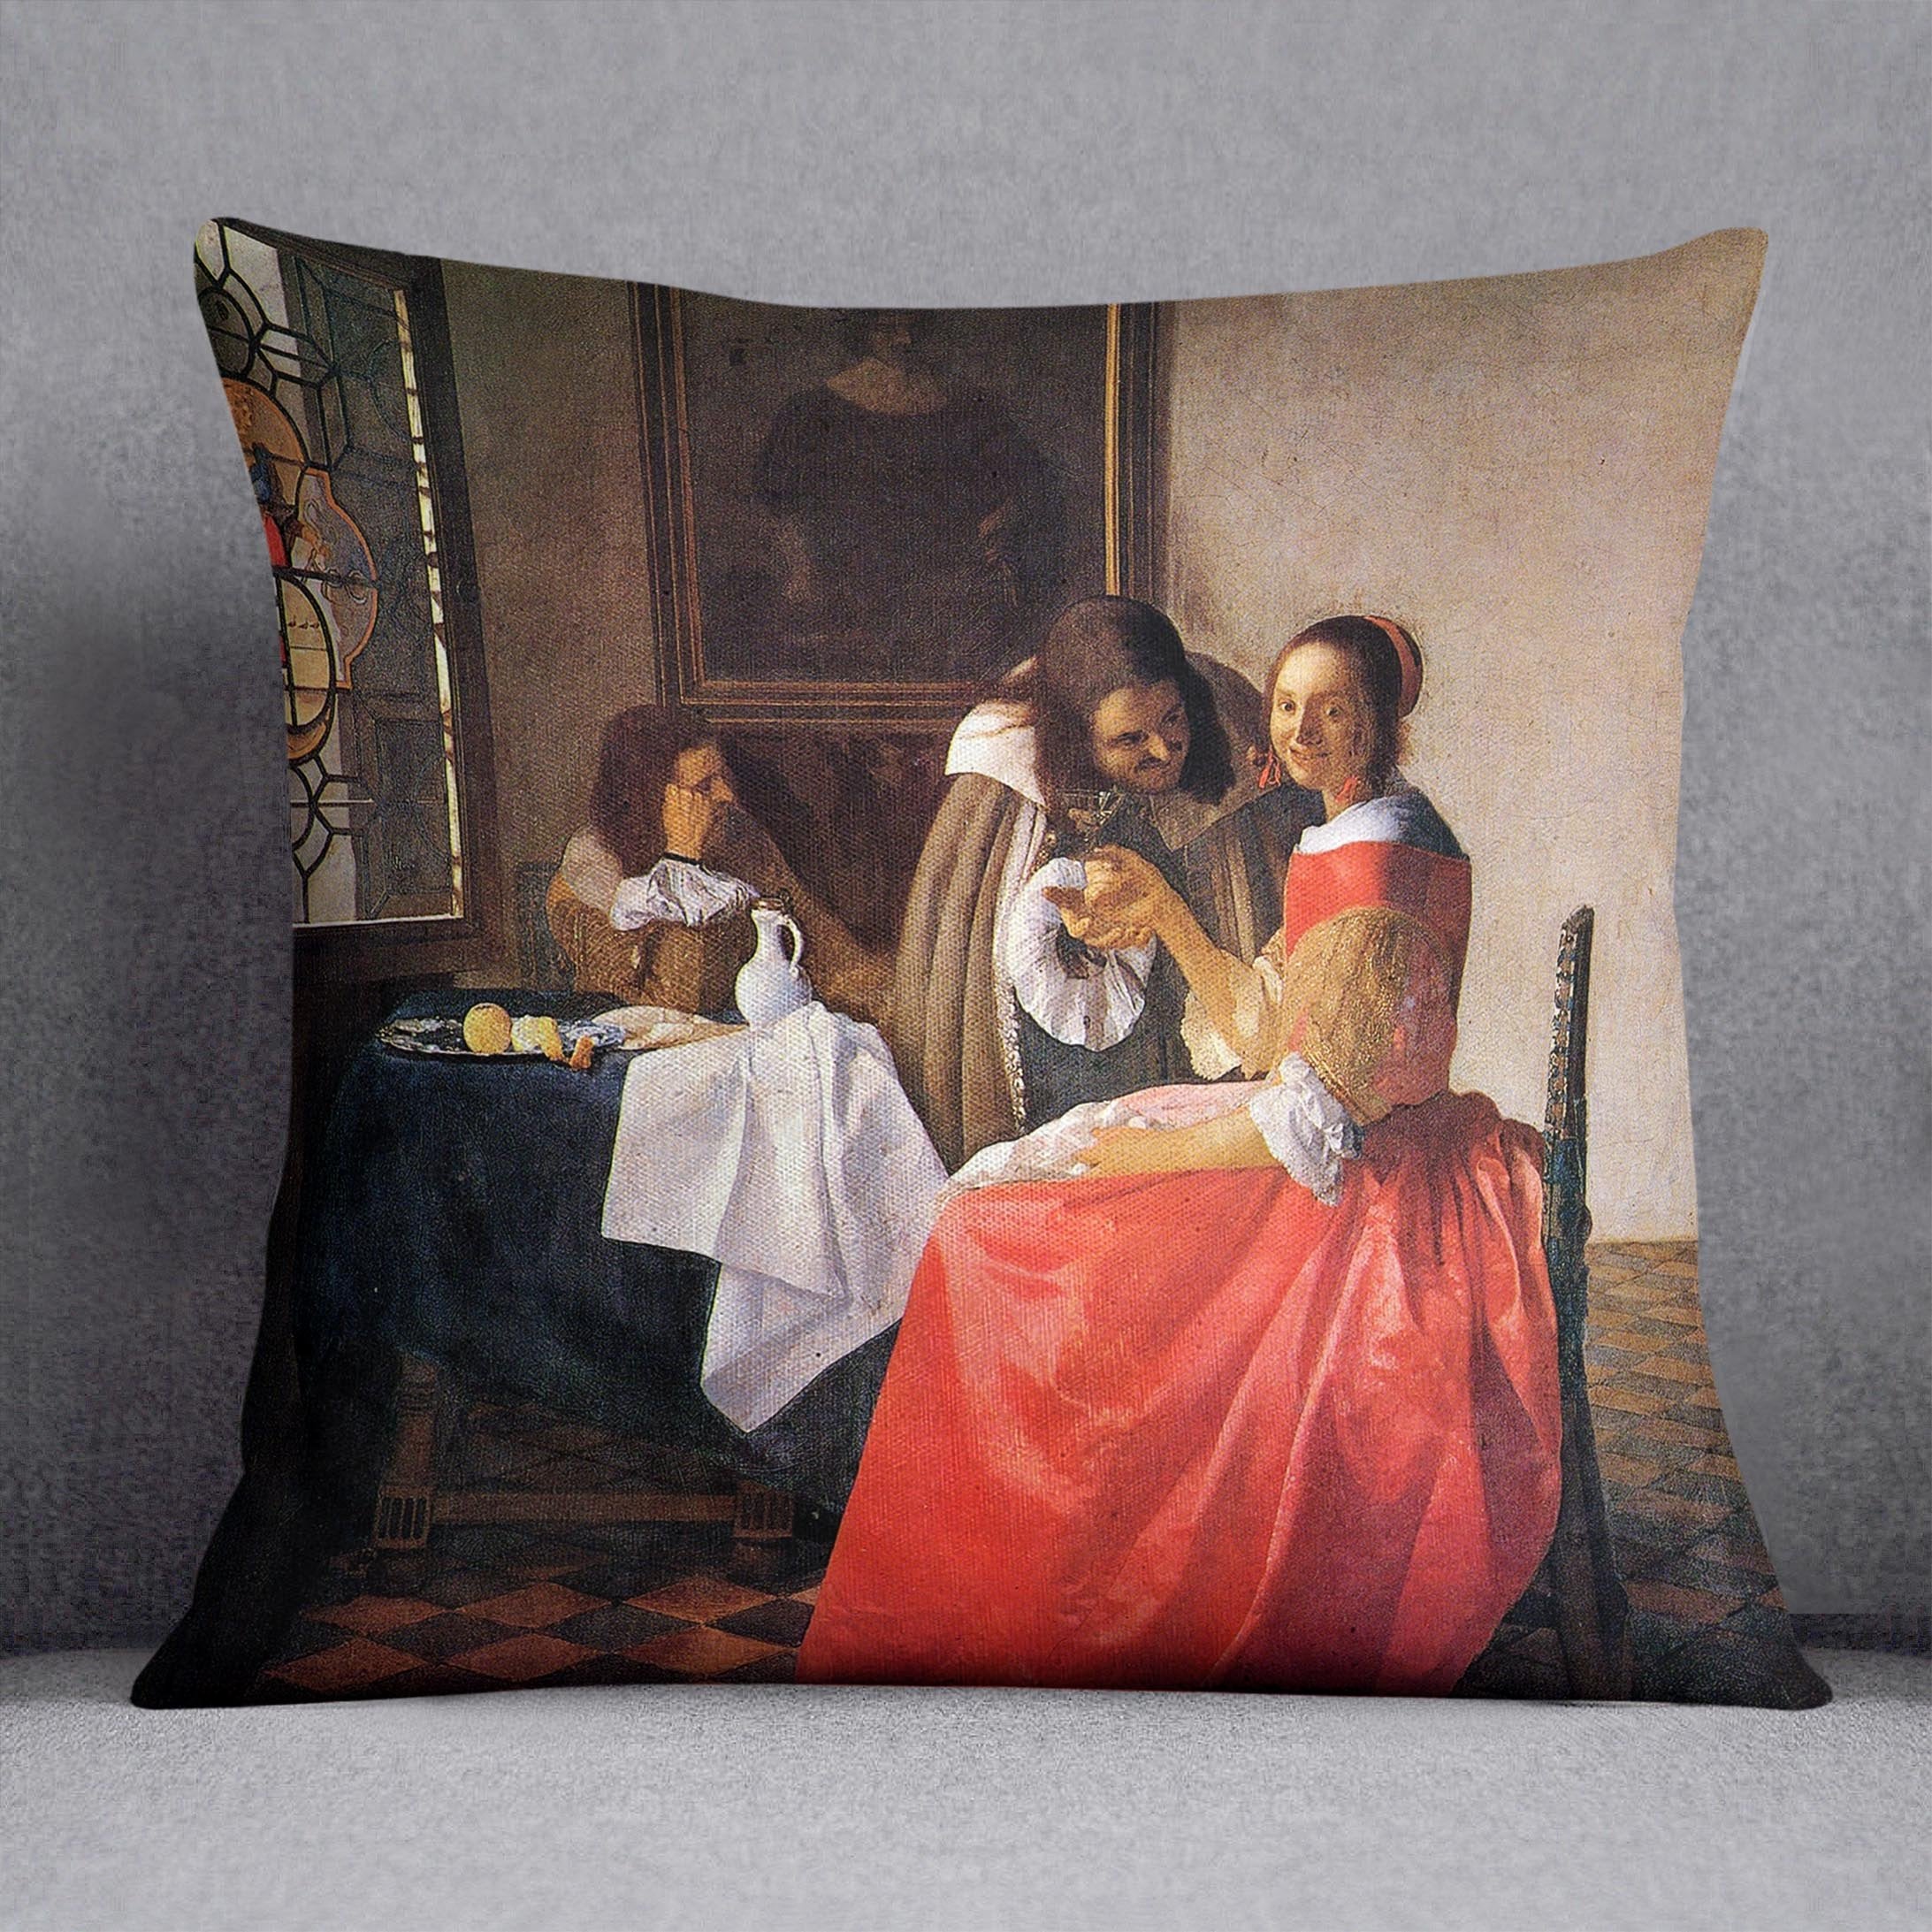 Girl with a wine glass by Vermeer Cushion